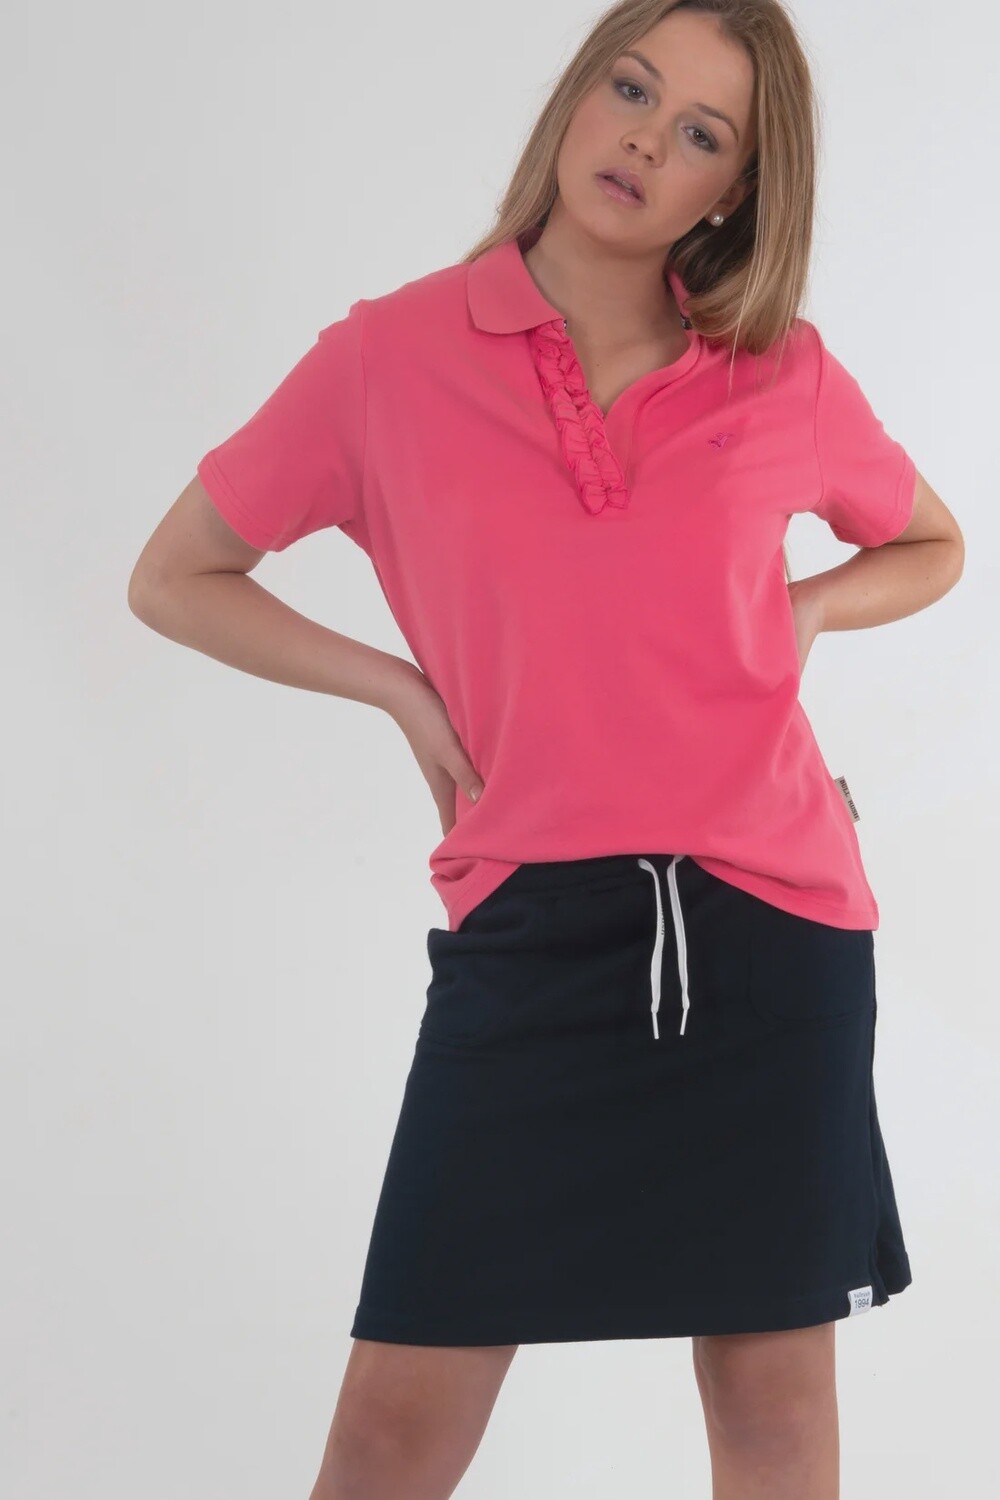 Bullrush Hot Pink Eyre Polo, Size: S